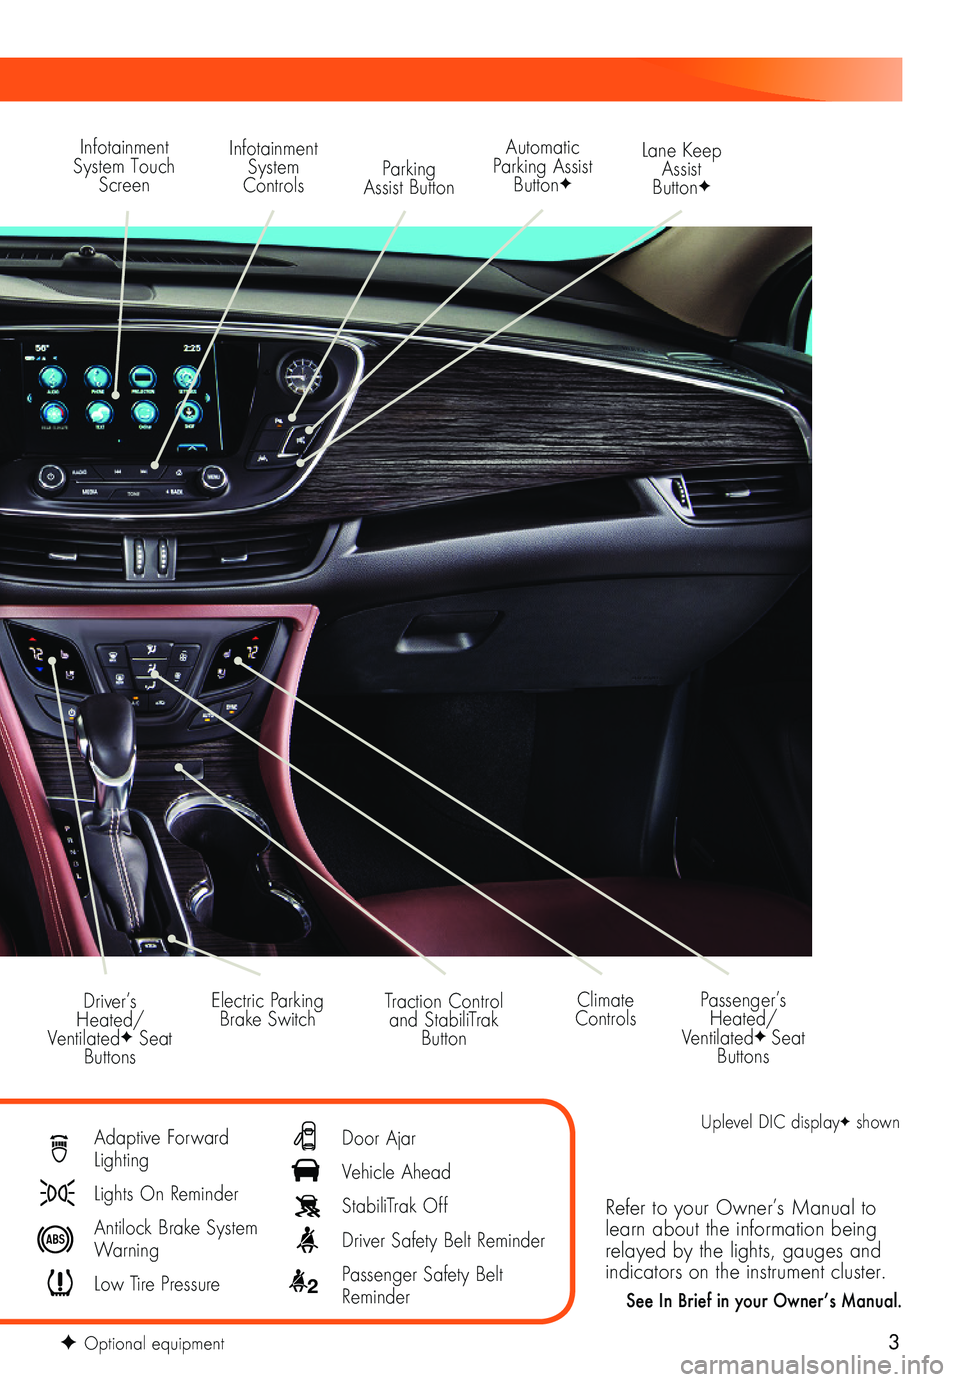 BUICK BENVISION 2018  Get To Know Guide 3
Refer to your Owner’s Manual to learn about the information being relayed by the lights, gauges and indicators on the instrument cluster.
See In Brief in your Owner’s Manual.
Infotainment System